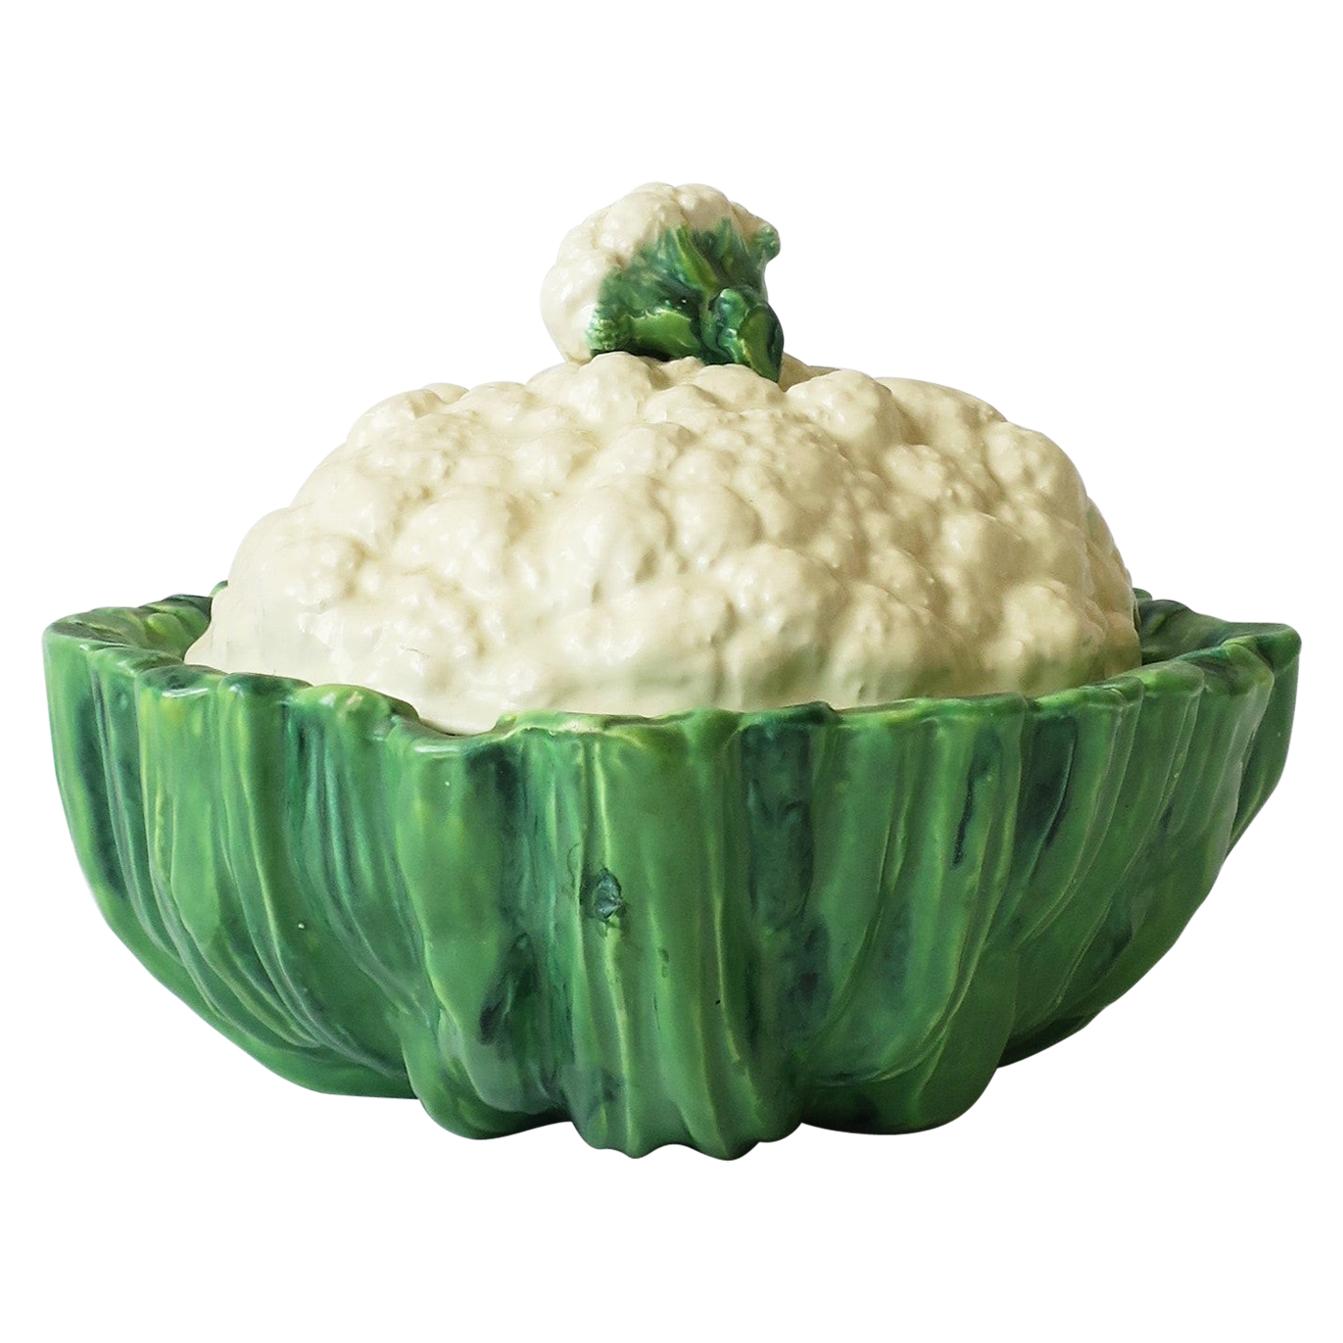 Cabbage Cauliflower Vegetable Soup Tureen Bowl in White and Green For Sale